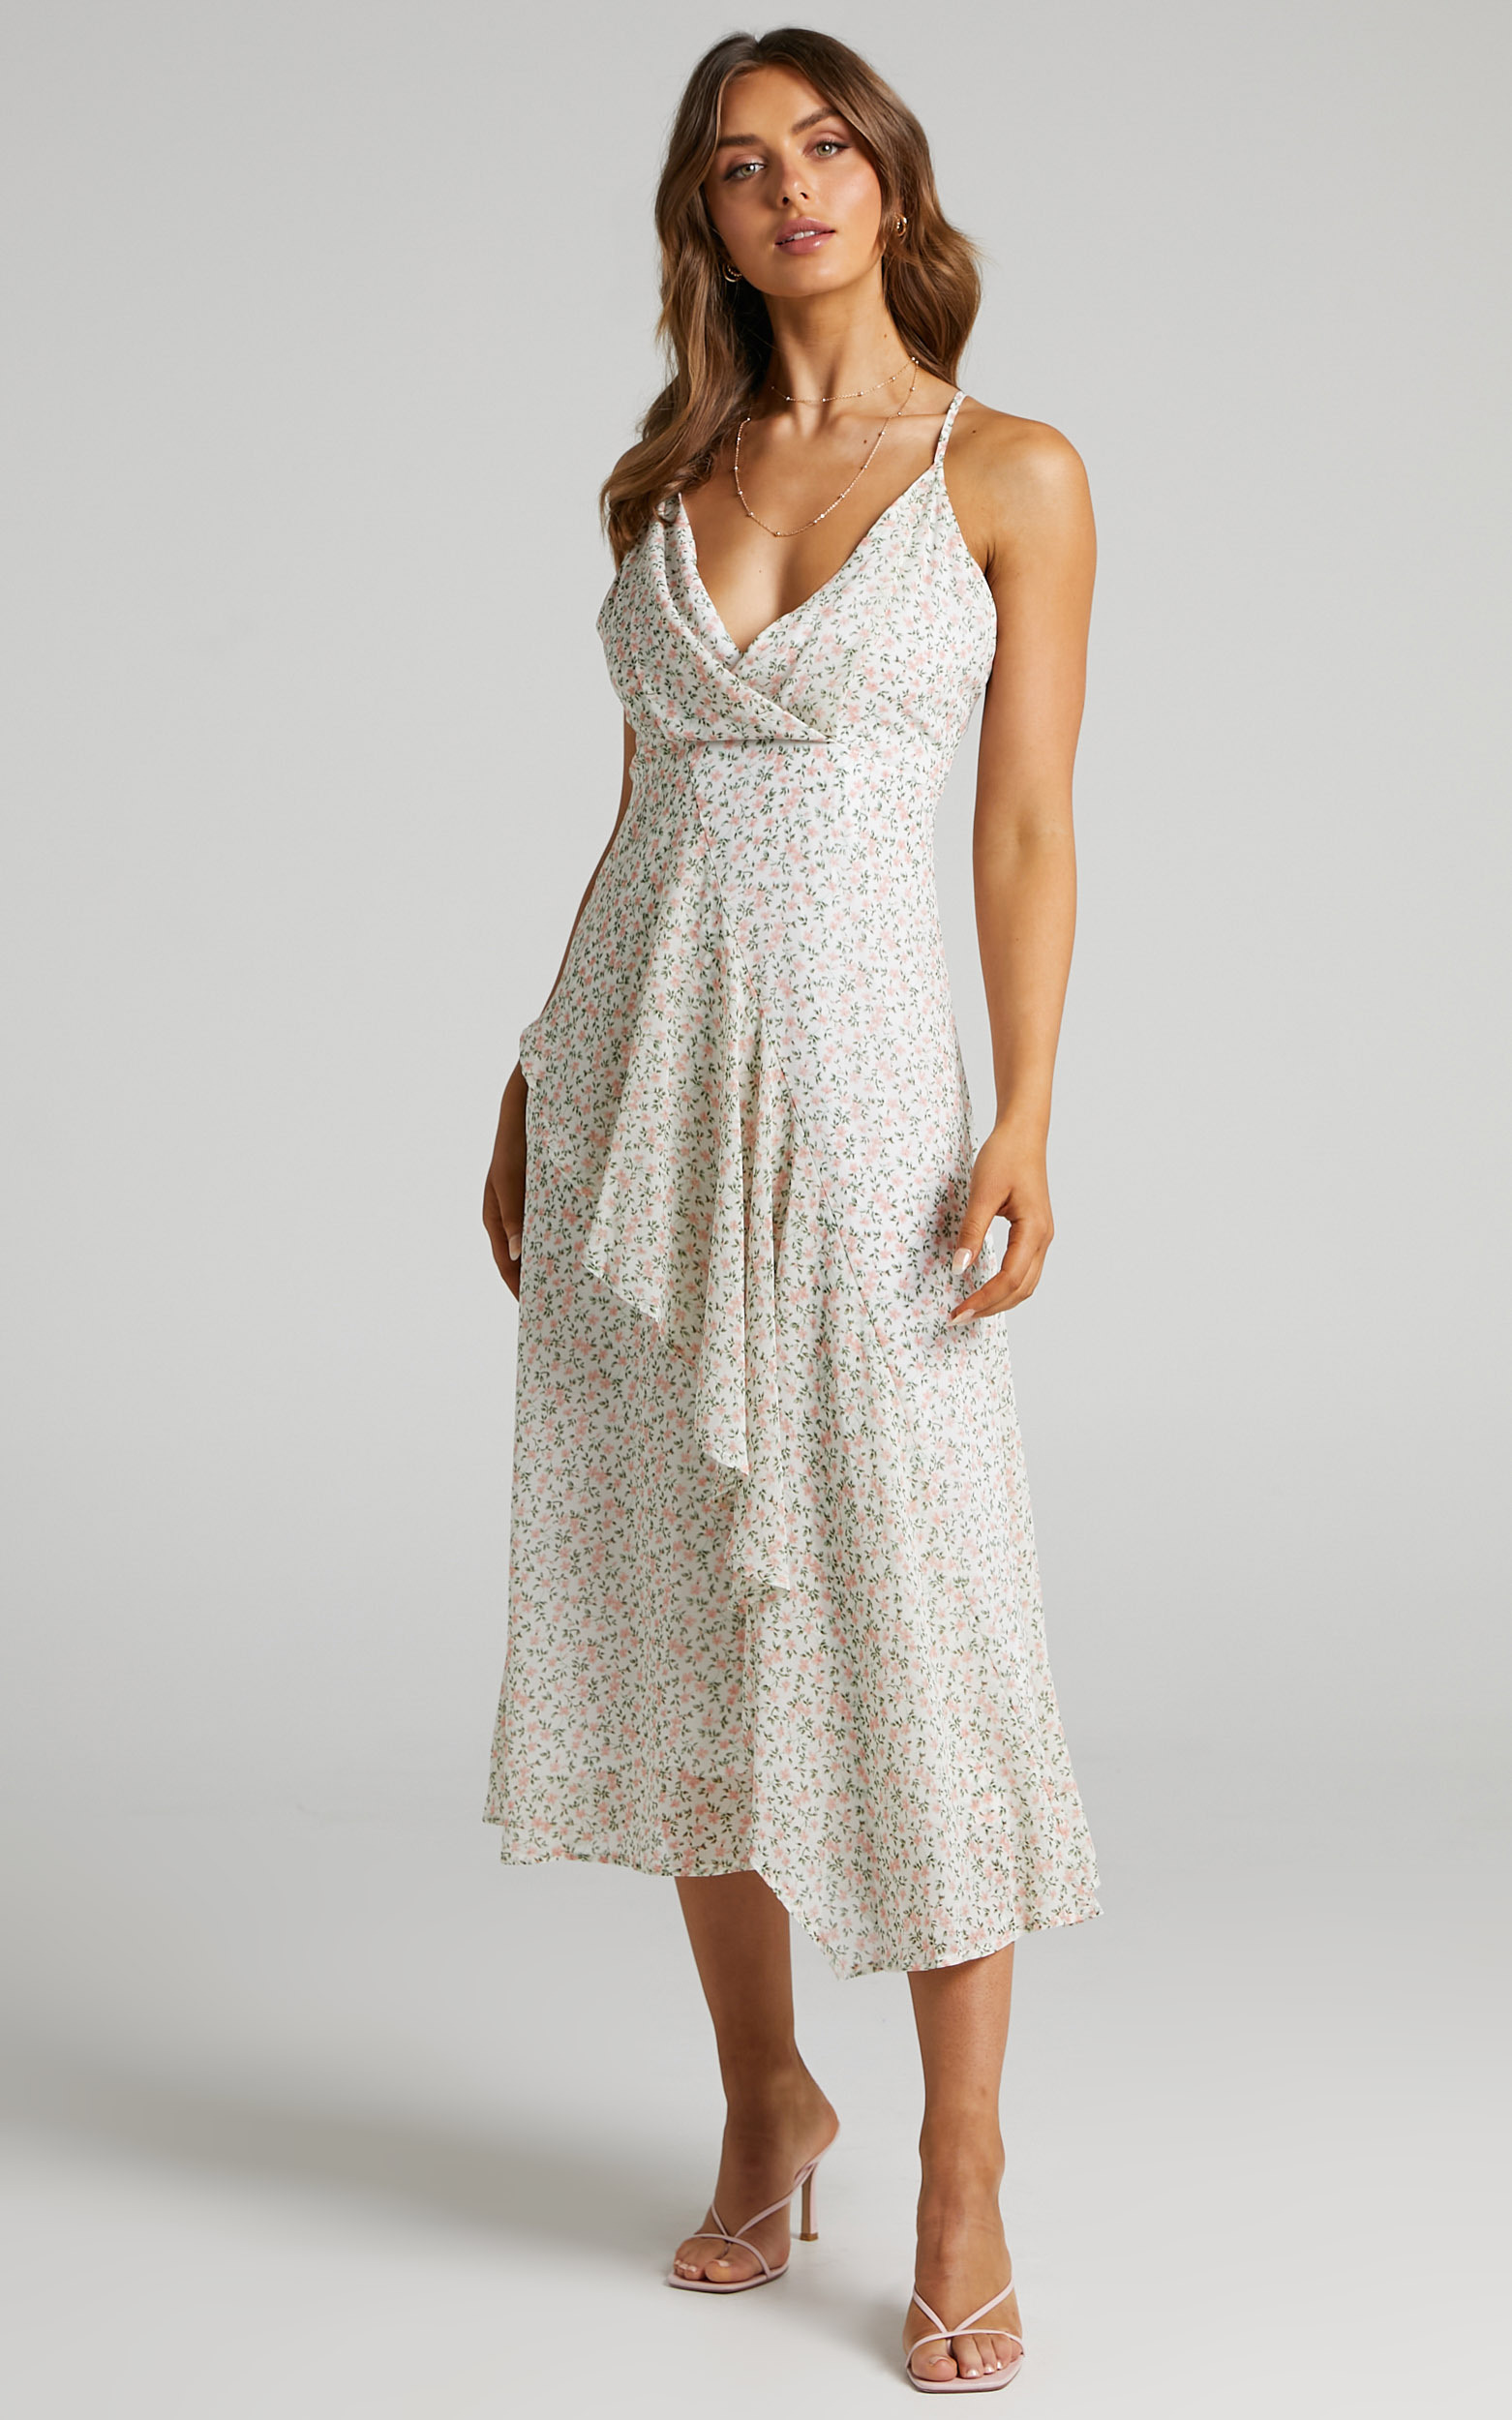 Luca Cowl Neck Midi Dress in White Floral - 06, WHT1, hi-res image number null